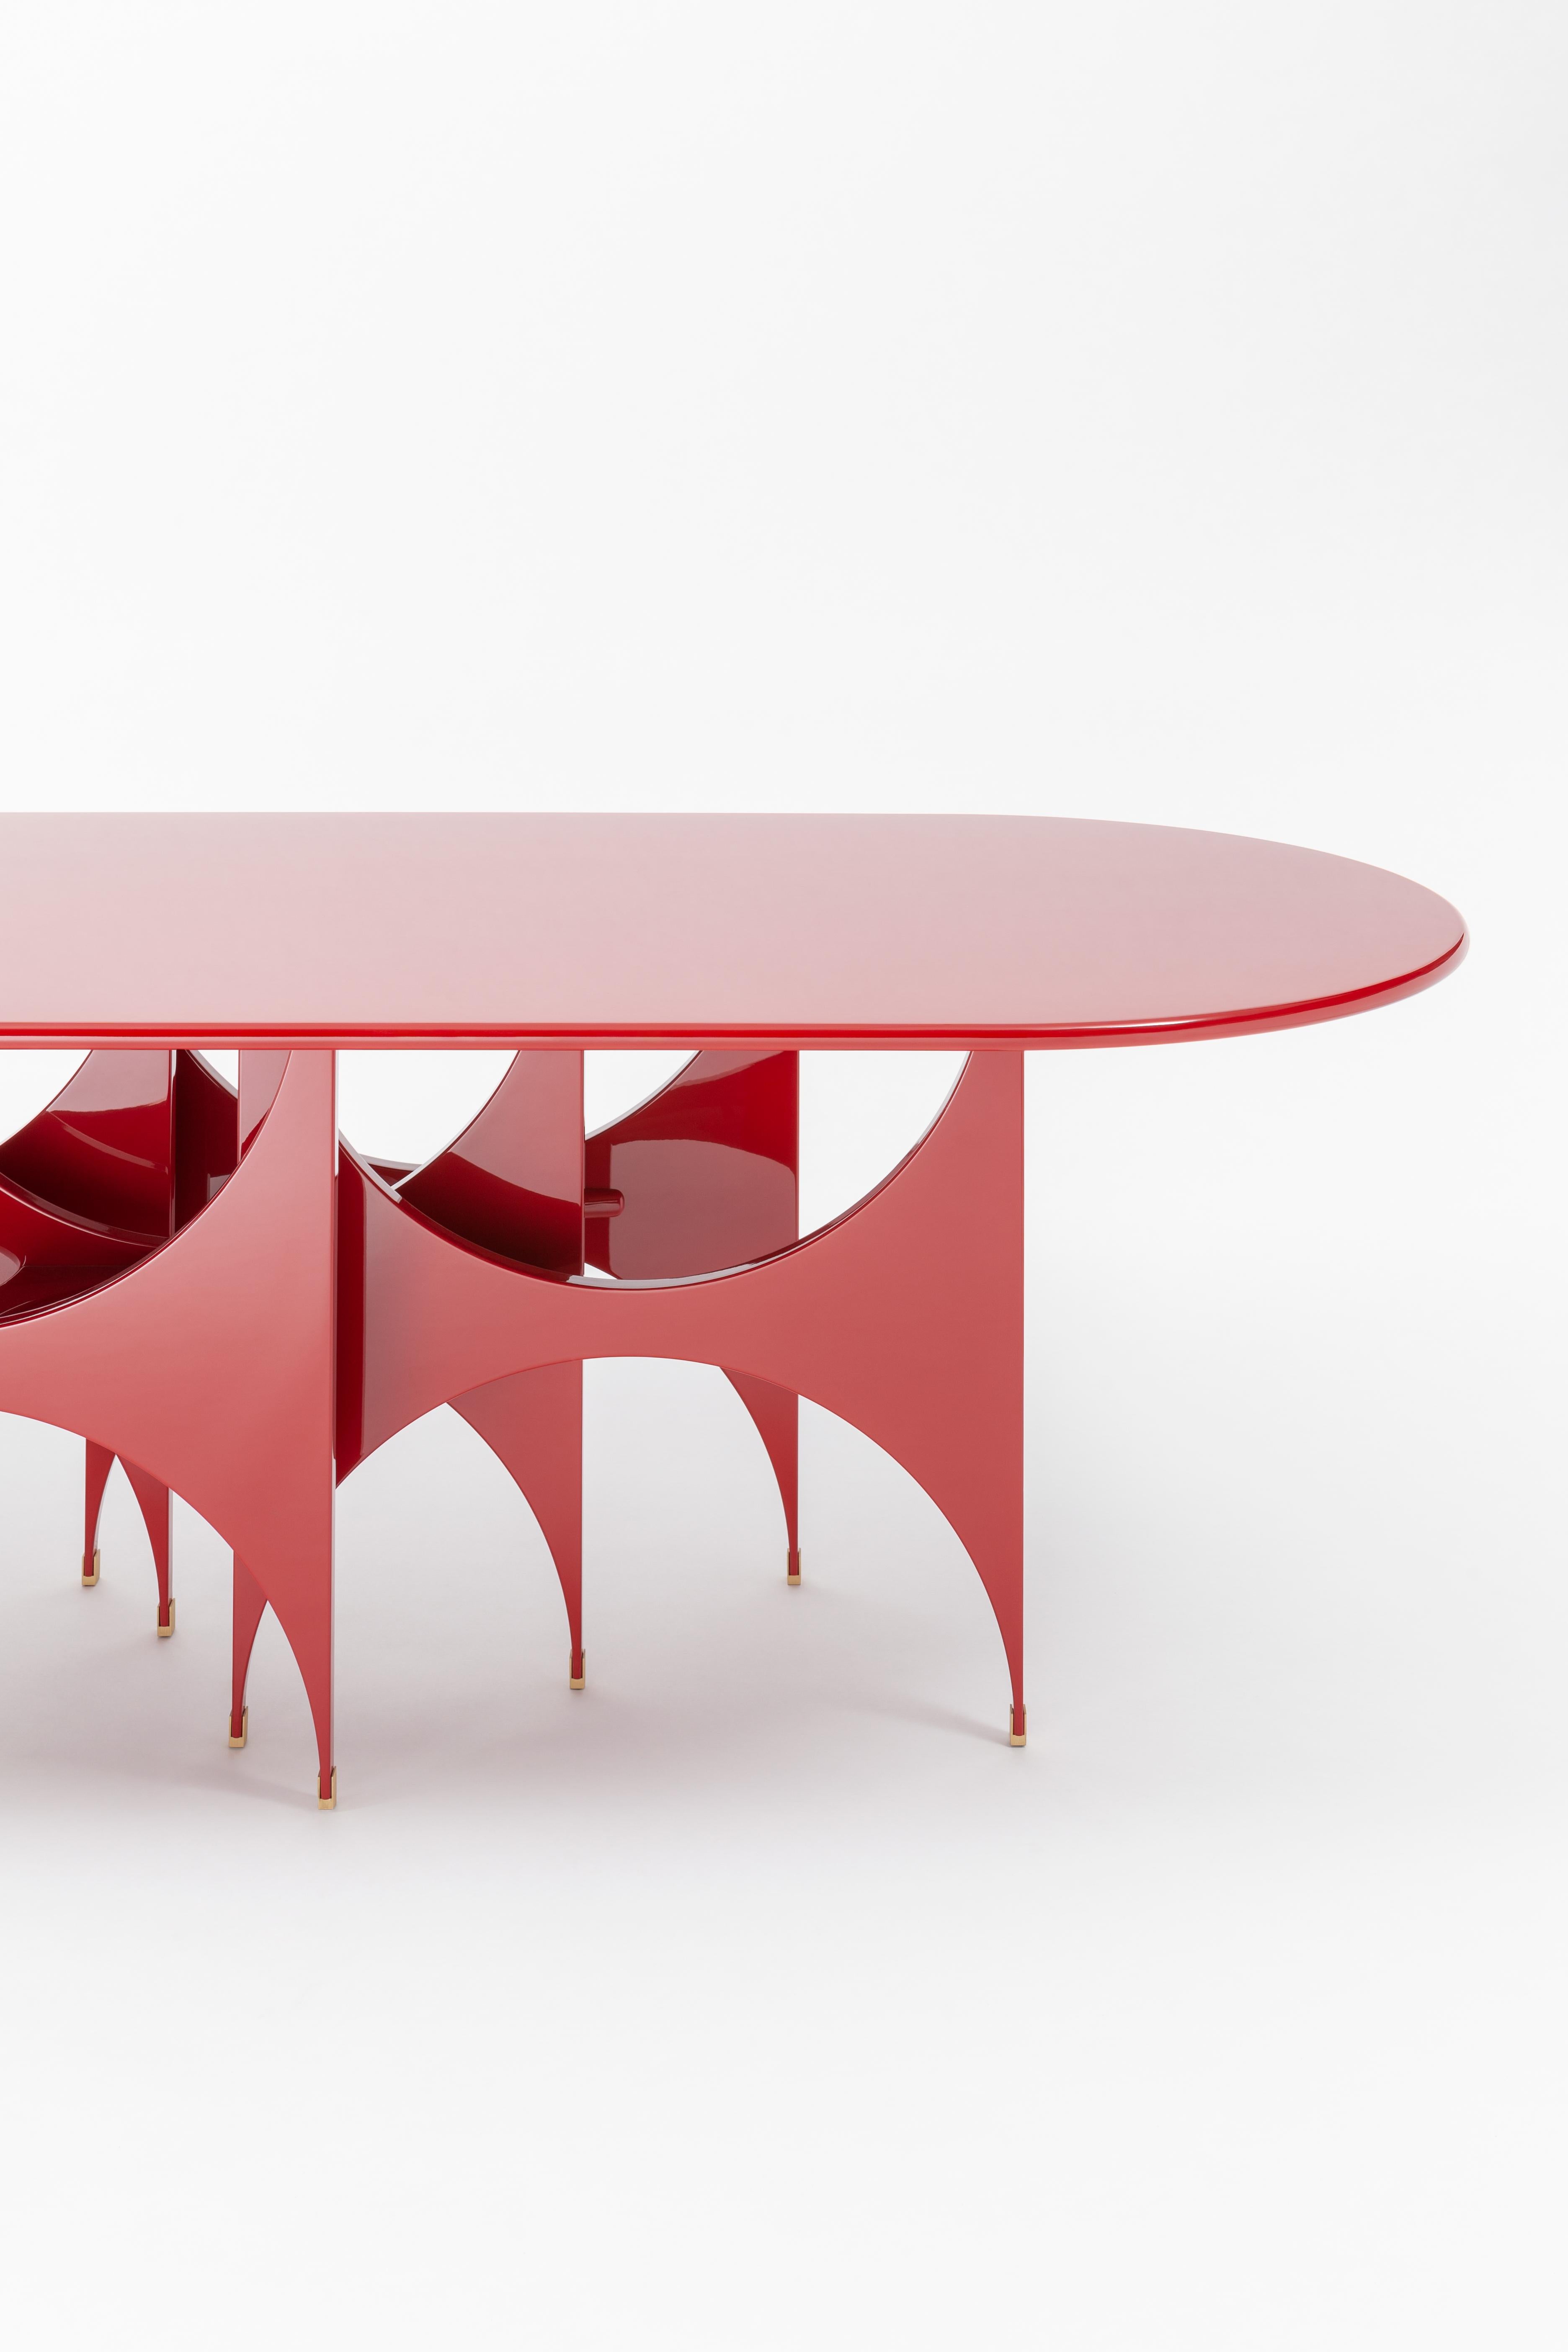 Italian Contemporary Oblong Table in Red Butterfly by Hannes Peer For Sale